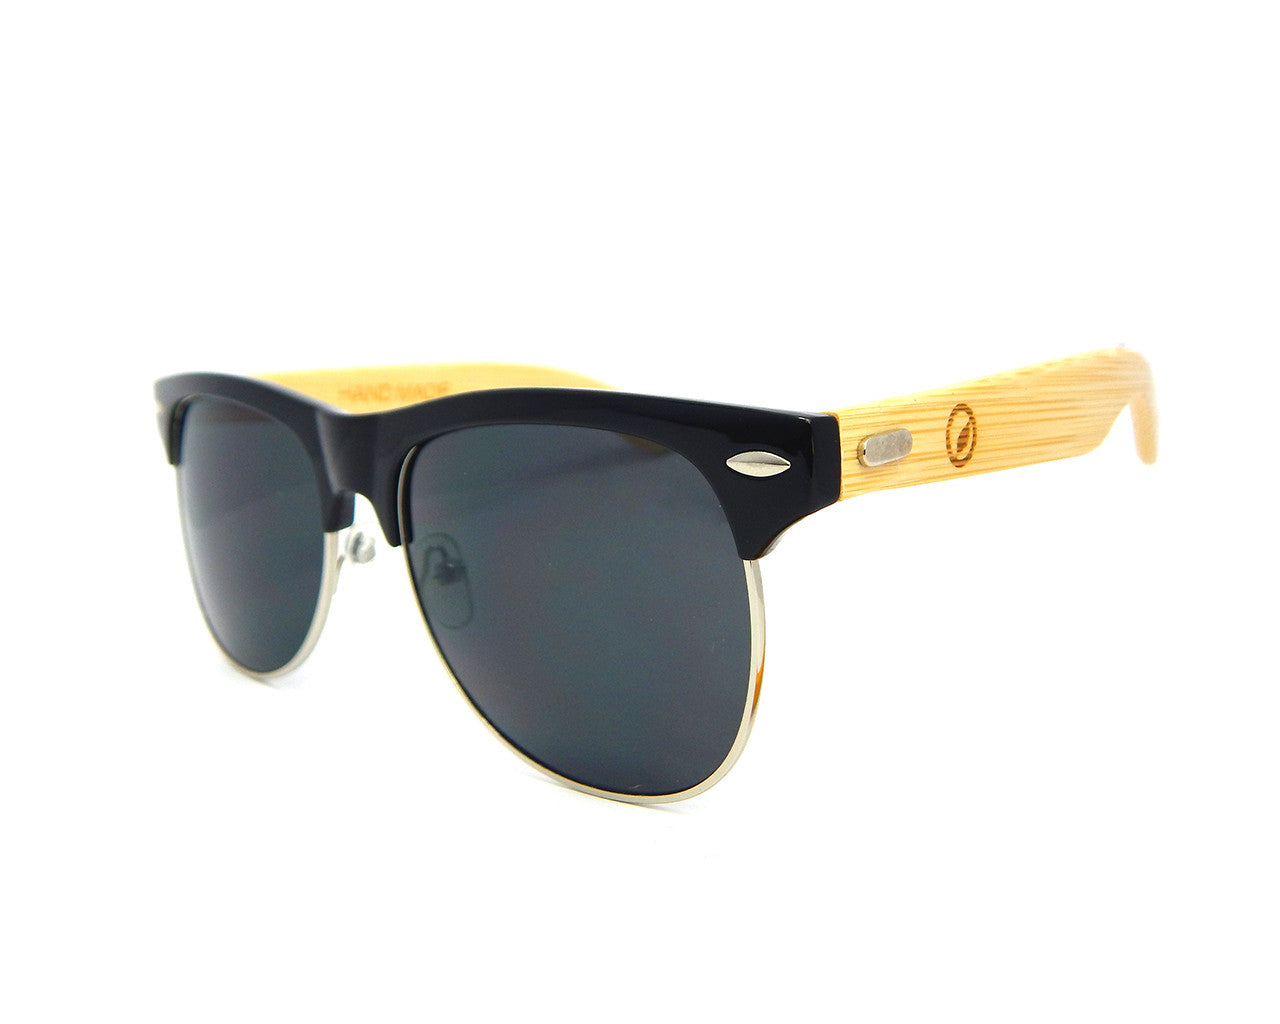 Bamboo Sunglasses Black Tint BSC01 - Natural Clothes Bamboo Clothing & Accessories for Men & Women 